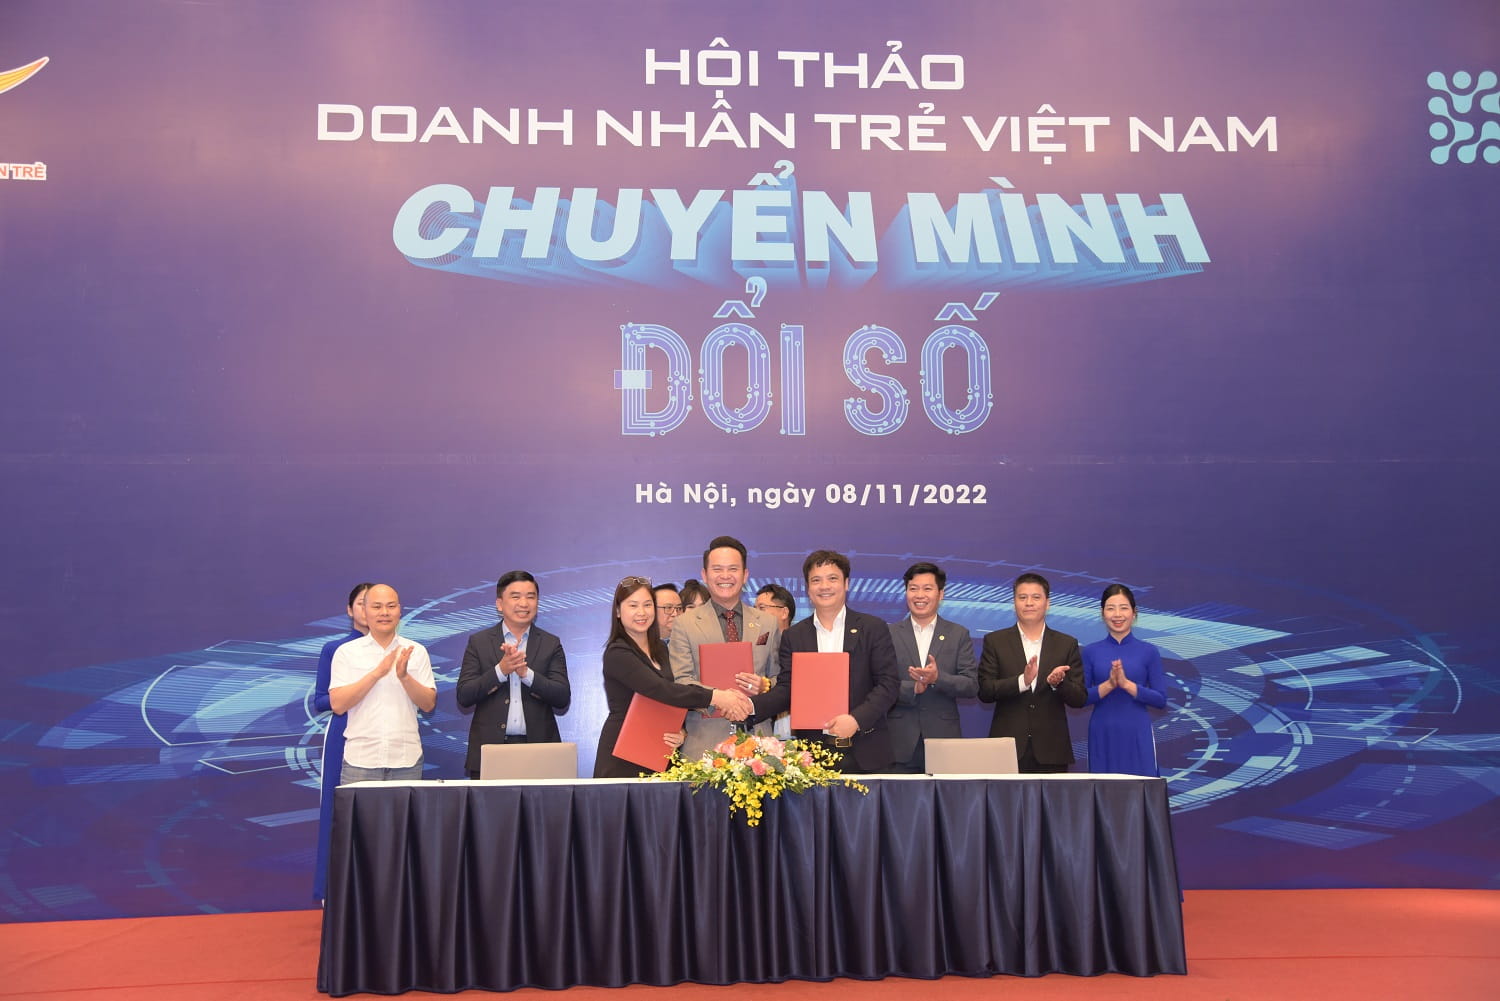 Representatives of VYEA, VINASA, and FPT - Mr. Nguyen Van Khoa, CEO of FPT (first row, far right) at the signing ceremony